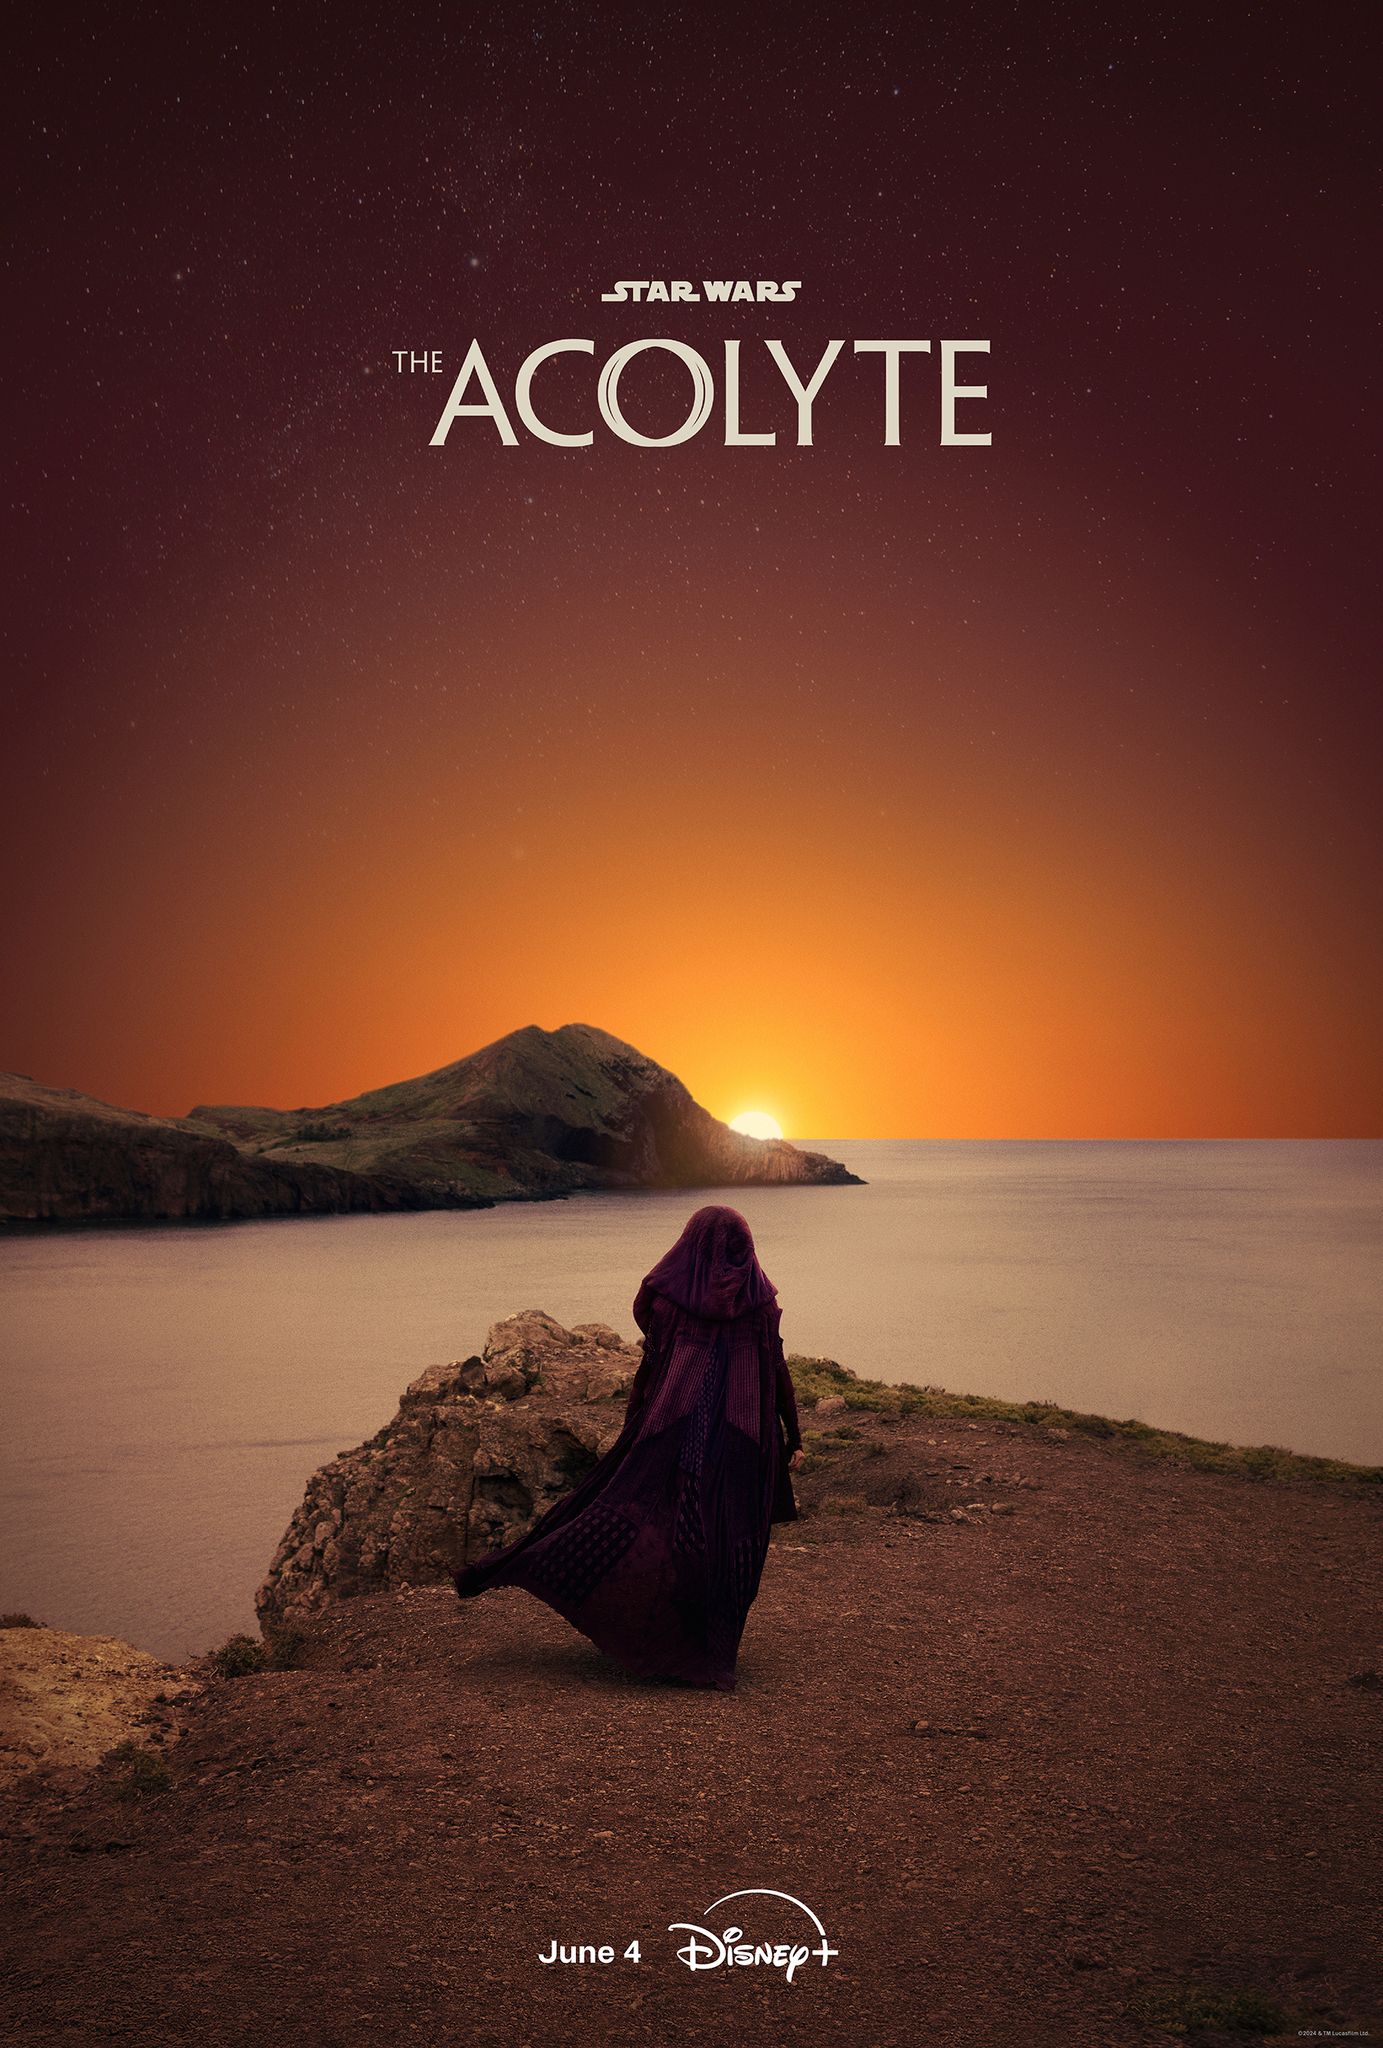 Star Wars the Acolyte Poster Showing a Sith Standing Atop a Cliff Looking at the Sunrise